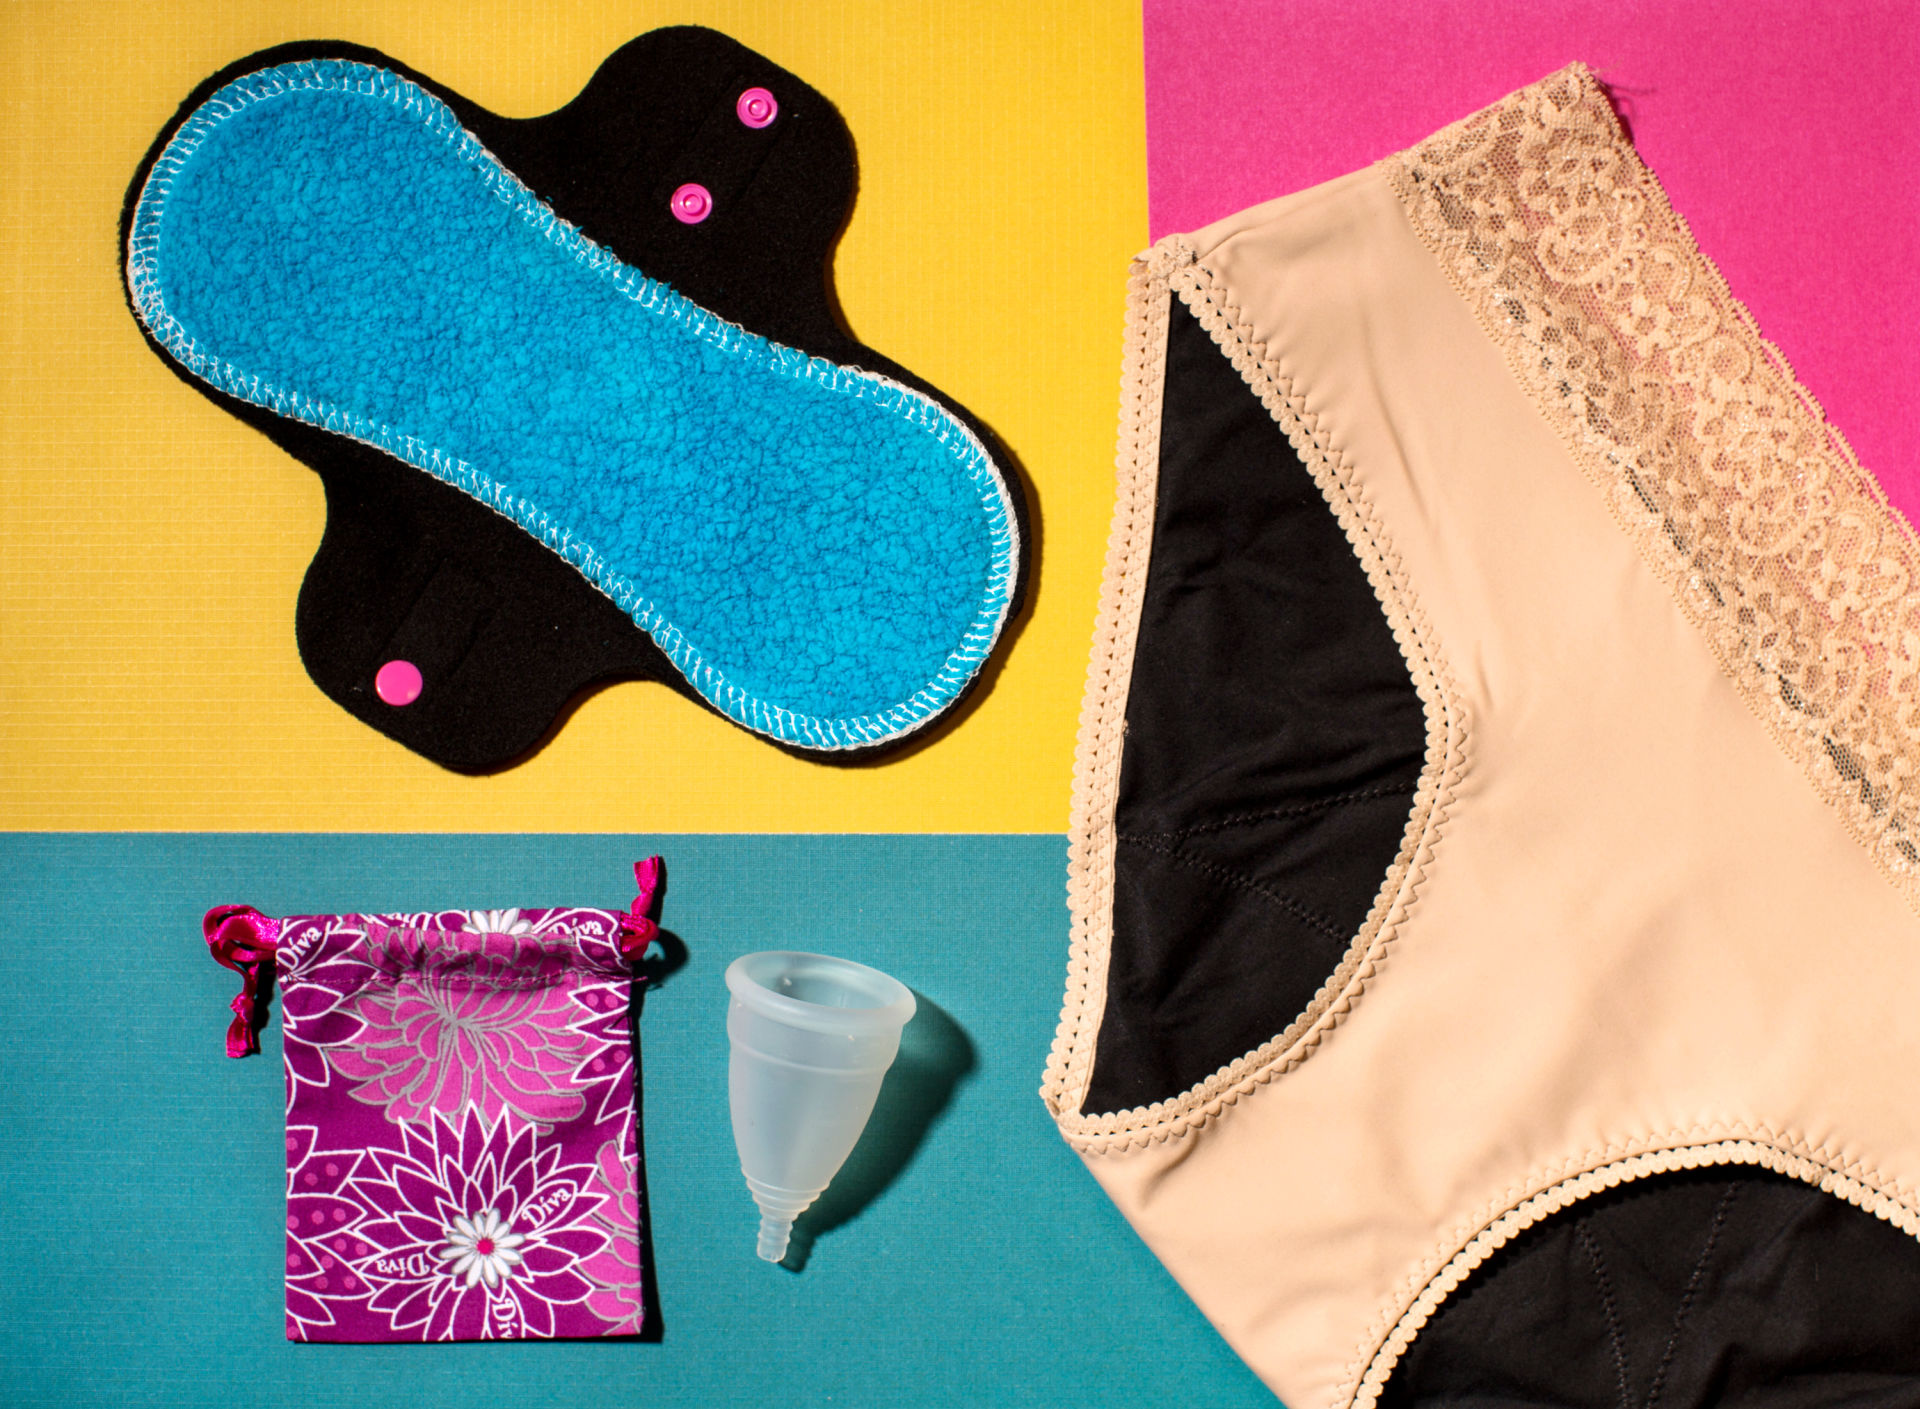 New products include a reusable pad made of fleece, a pair of THINX underwear and a DivaCup with carrying case.